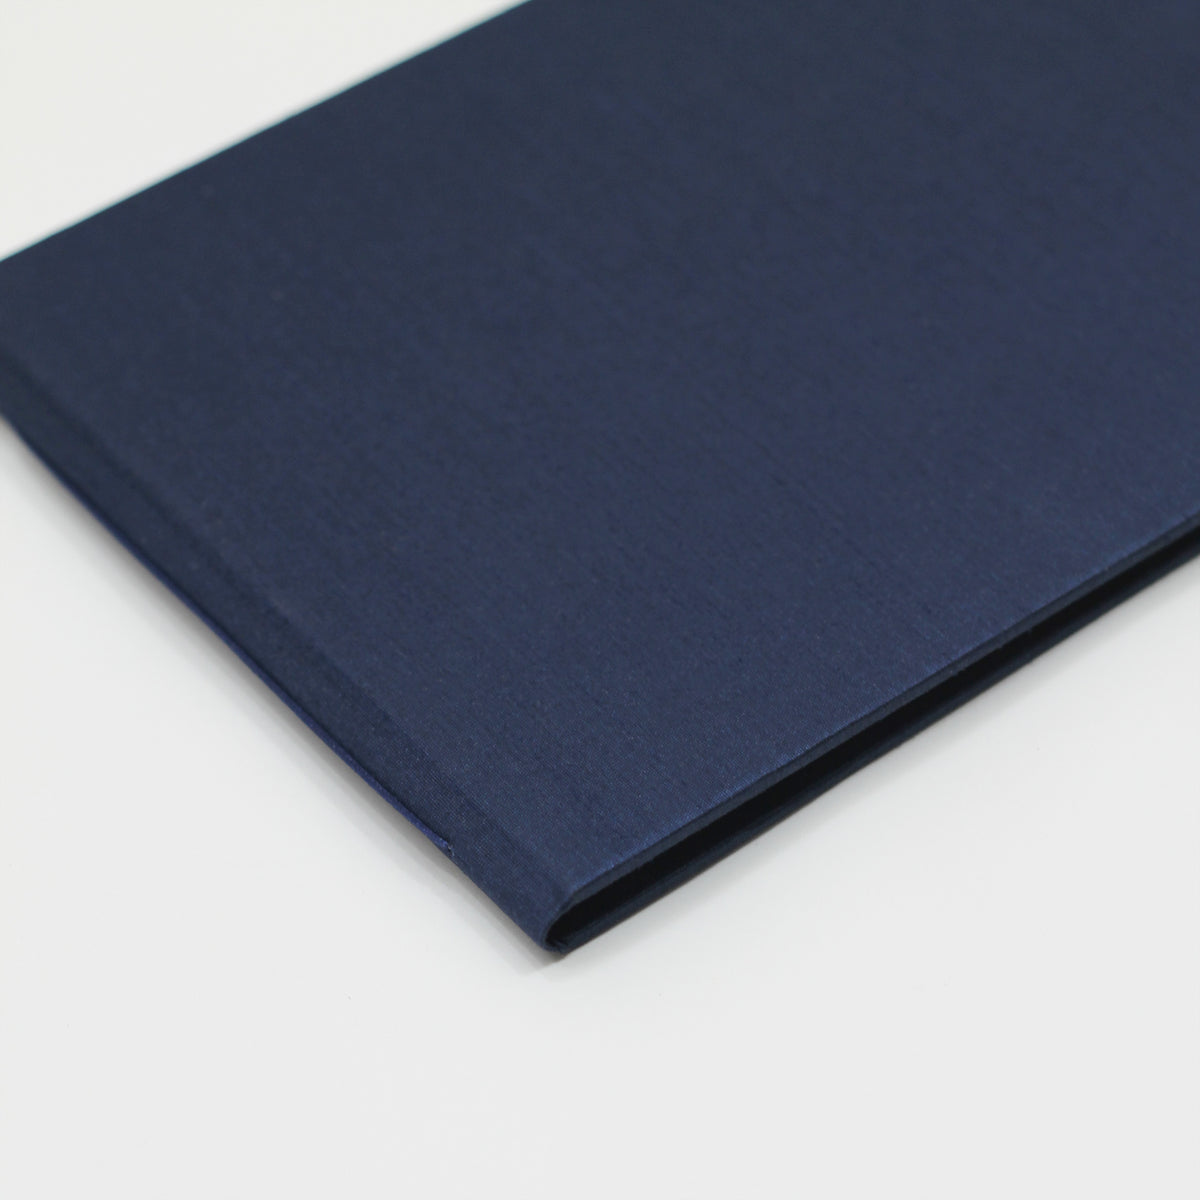 Classic Guestbook | Cover: Navy Silk | Available Personalized